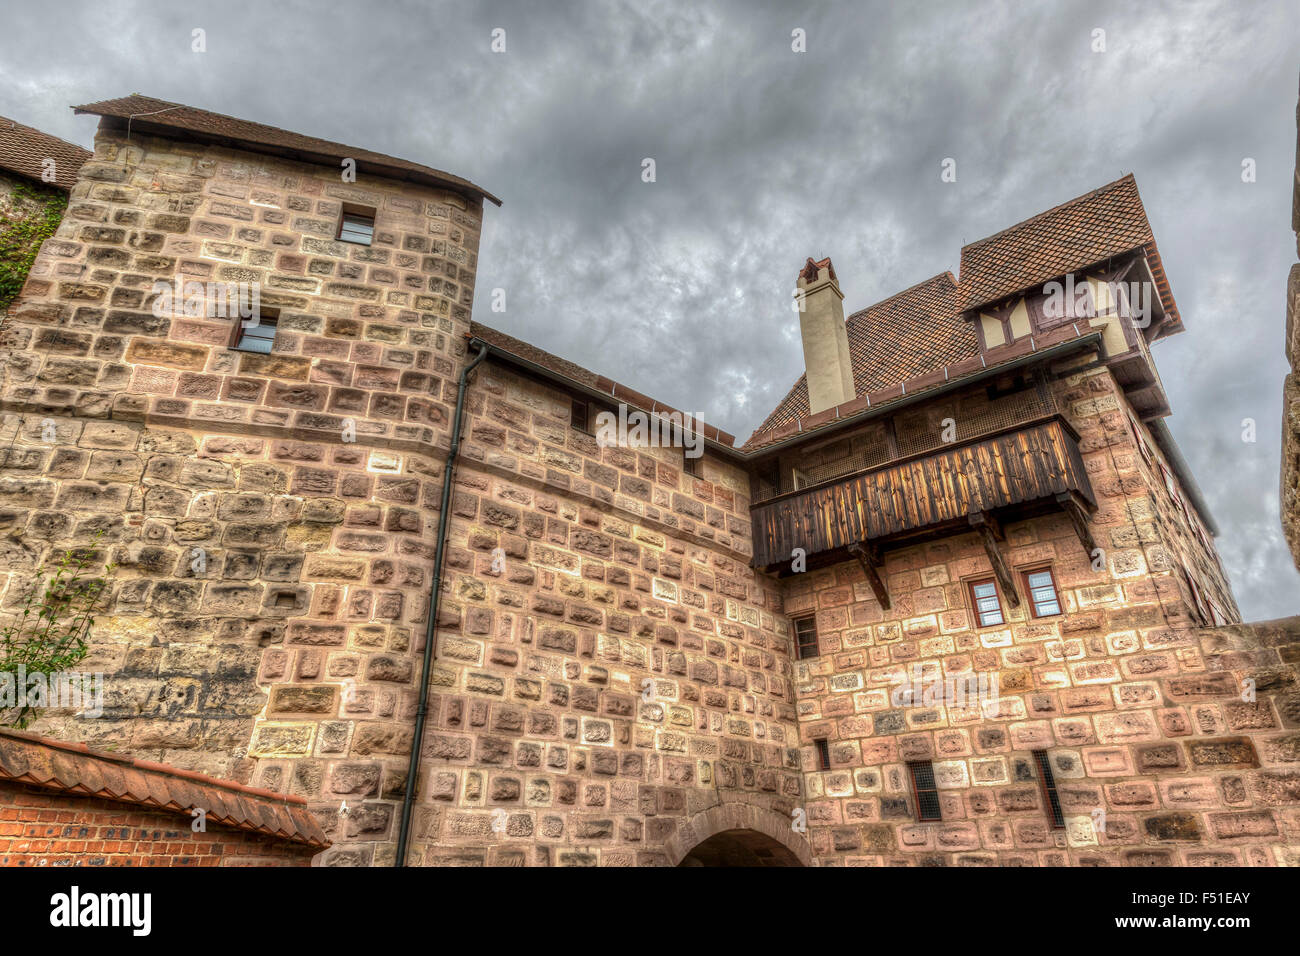 Buildings and architecture of the Bavarian Nuremberg Castle, Germany. Stock Photo